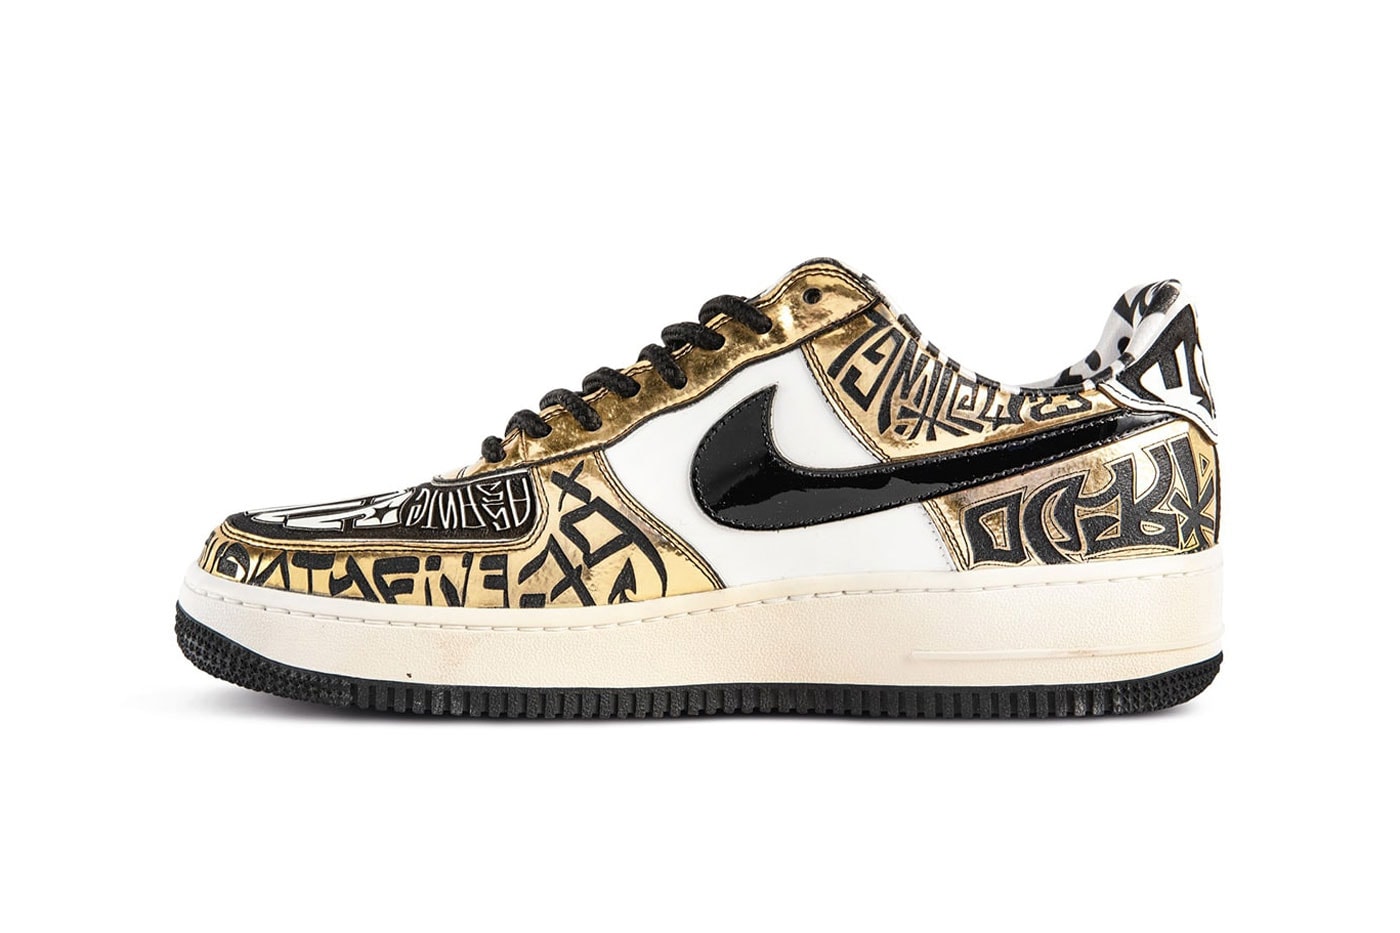 Sothebys auctions Nike Air Force 1 Entourage x Undefeated Fukijama Gold Premium Georges white and light blue los angeles queens boulevard film bruce kilgore AF1 dunk low samples hyperdrunks cp3 release info news